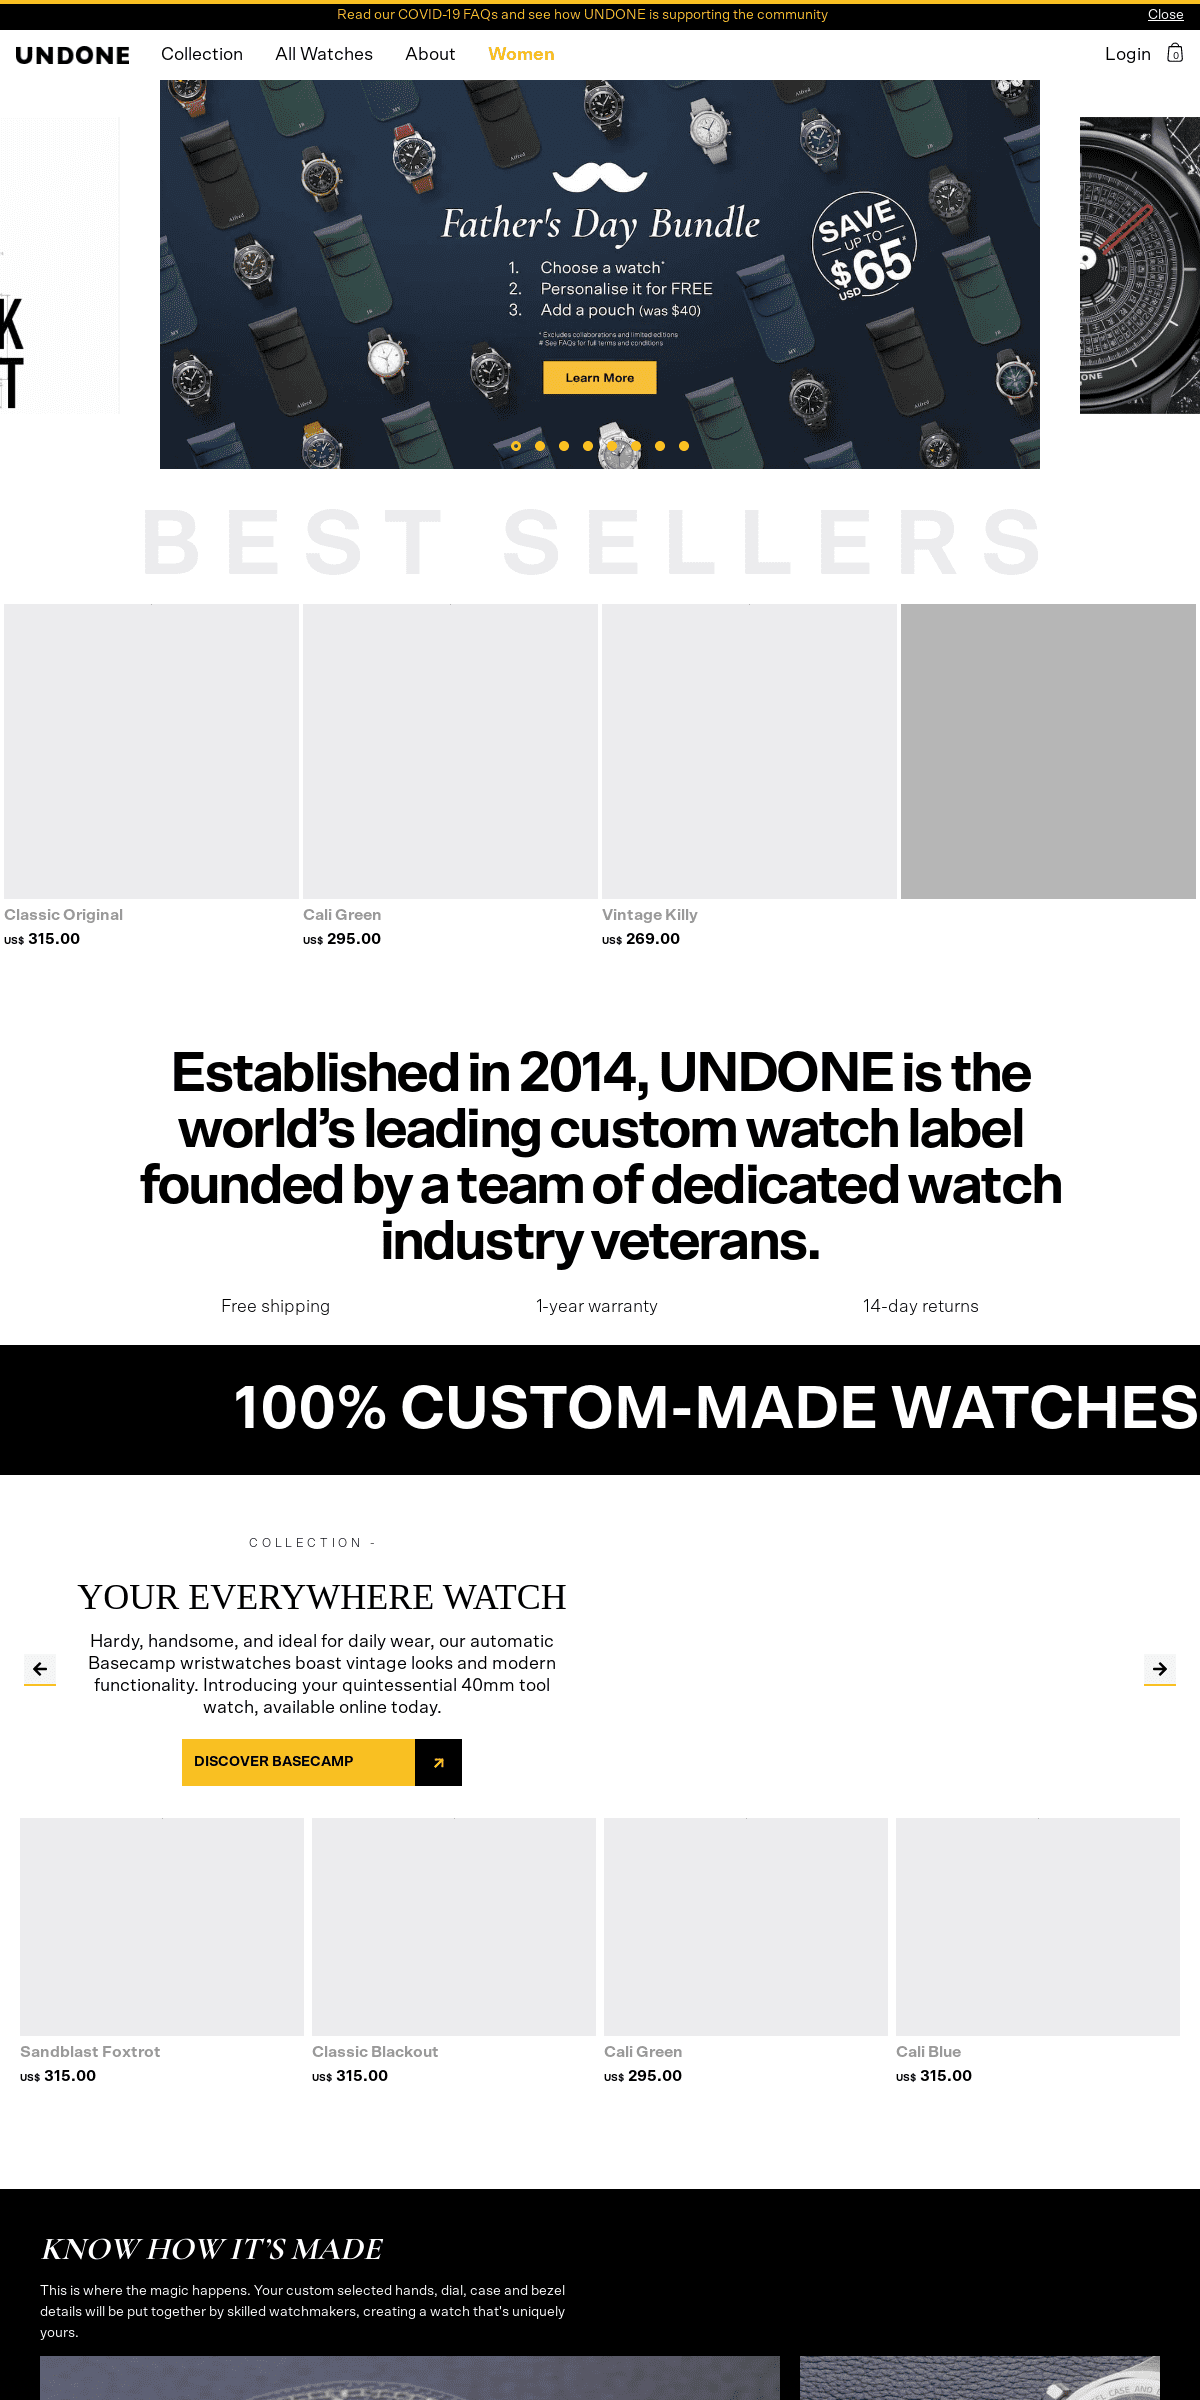 A complete backup of undone.com